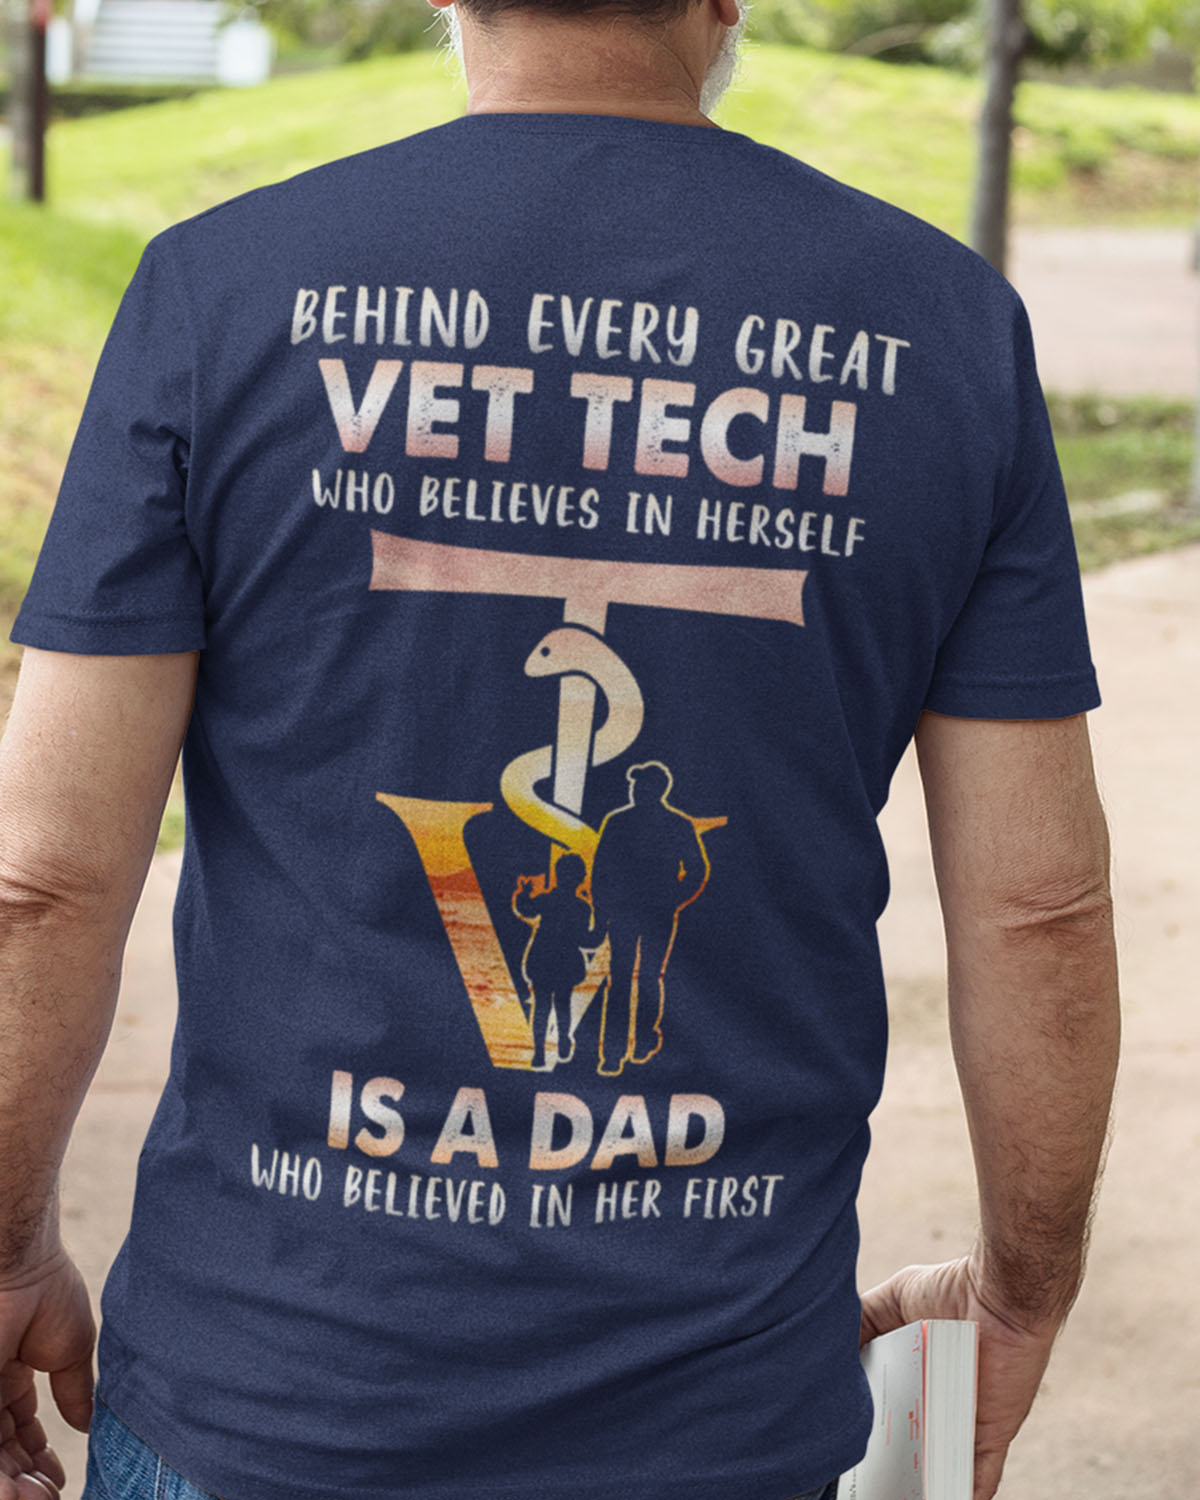 Behind every great vet tech who believes in herself is a dad who believed in her first - Vet tech